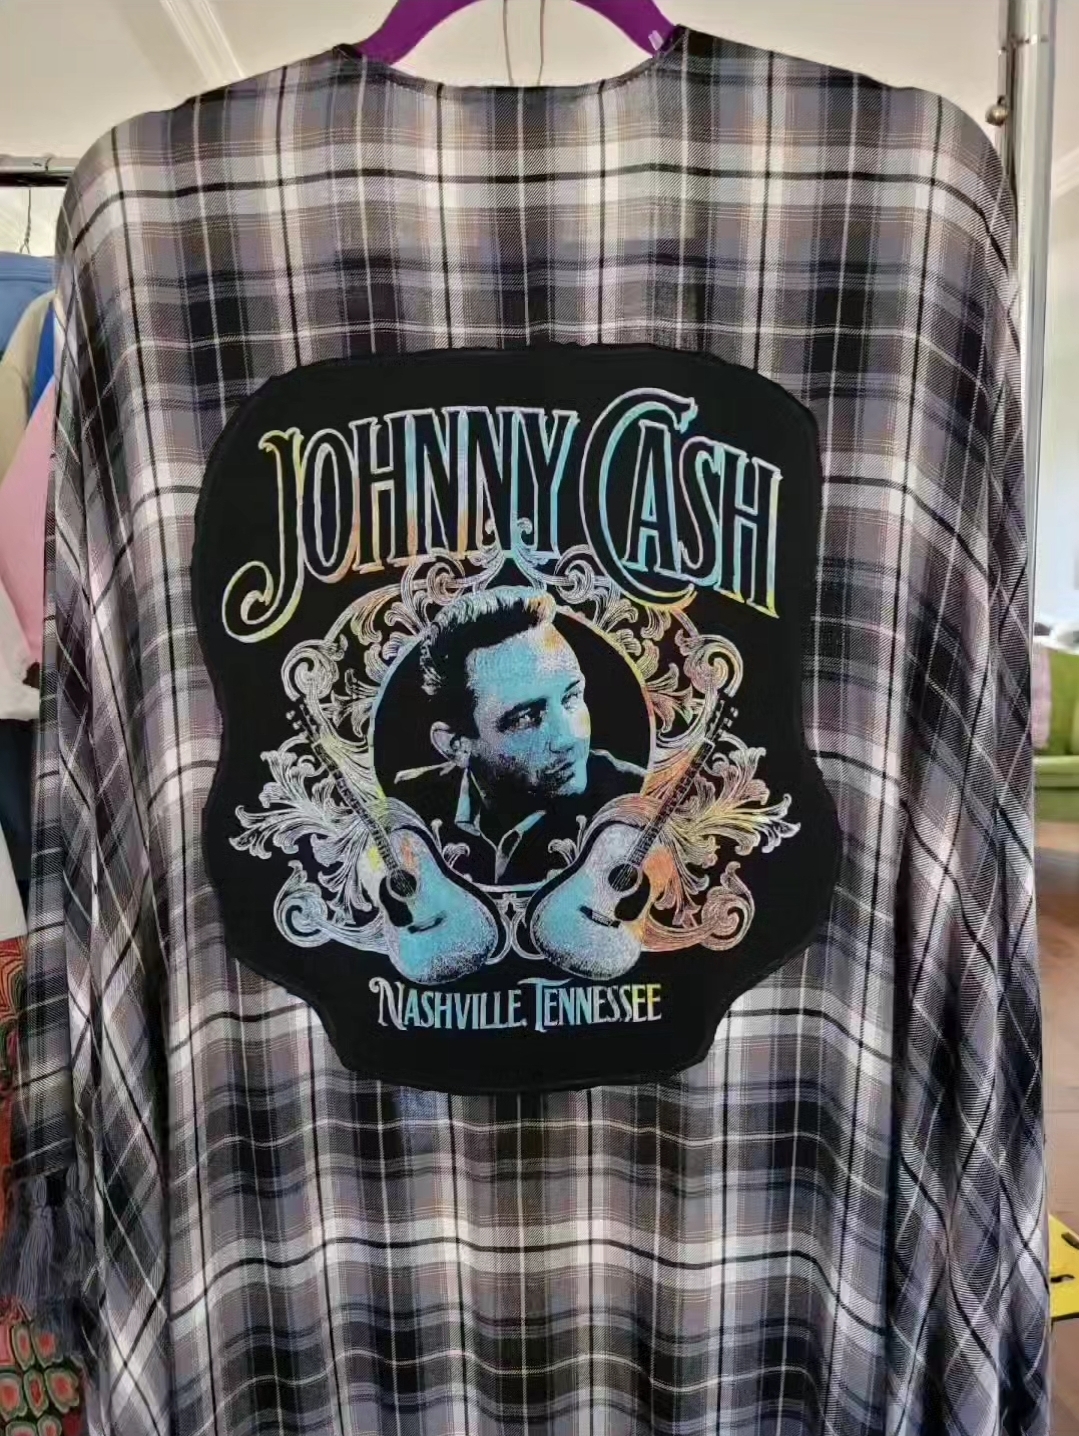 a black and white checkered shirt with a picture of johnny cash on it.